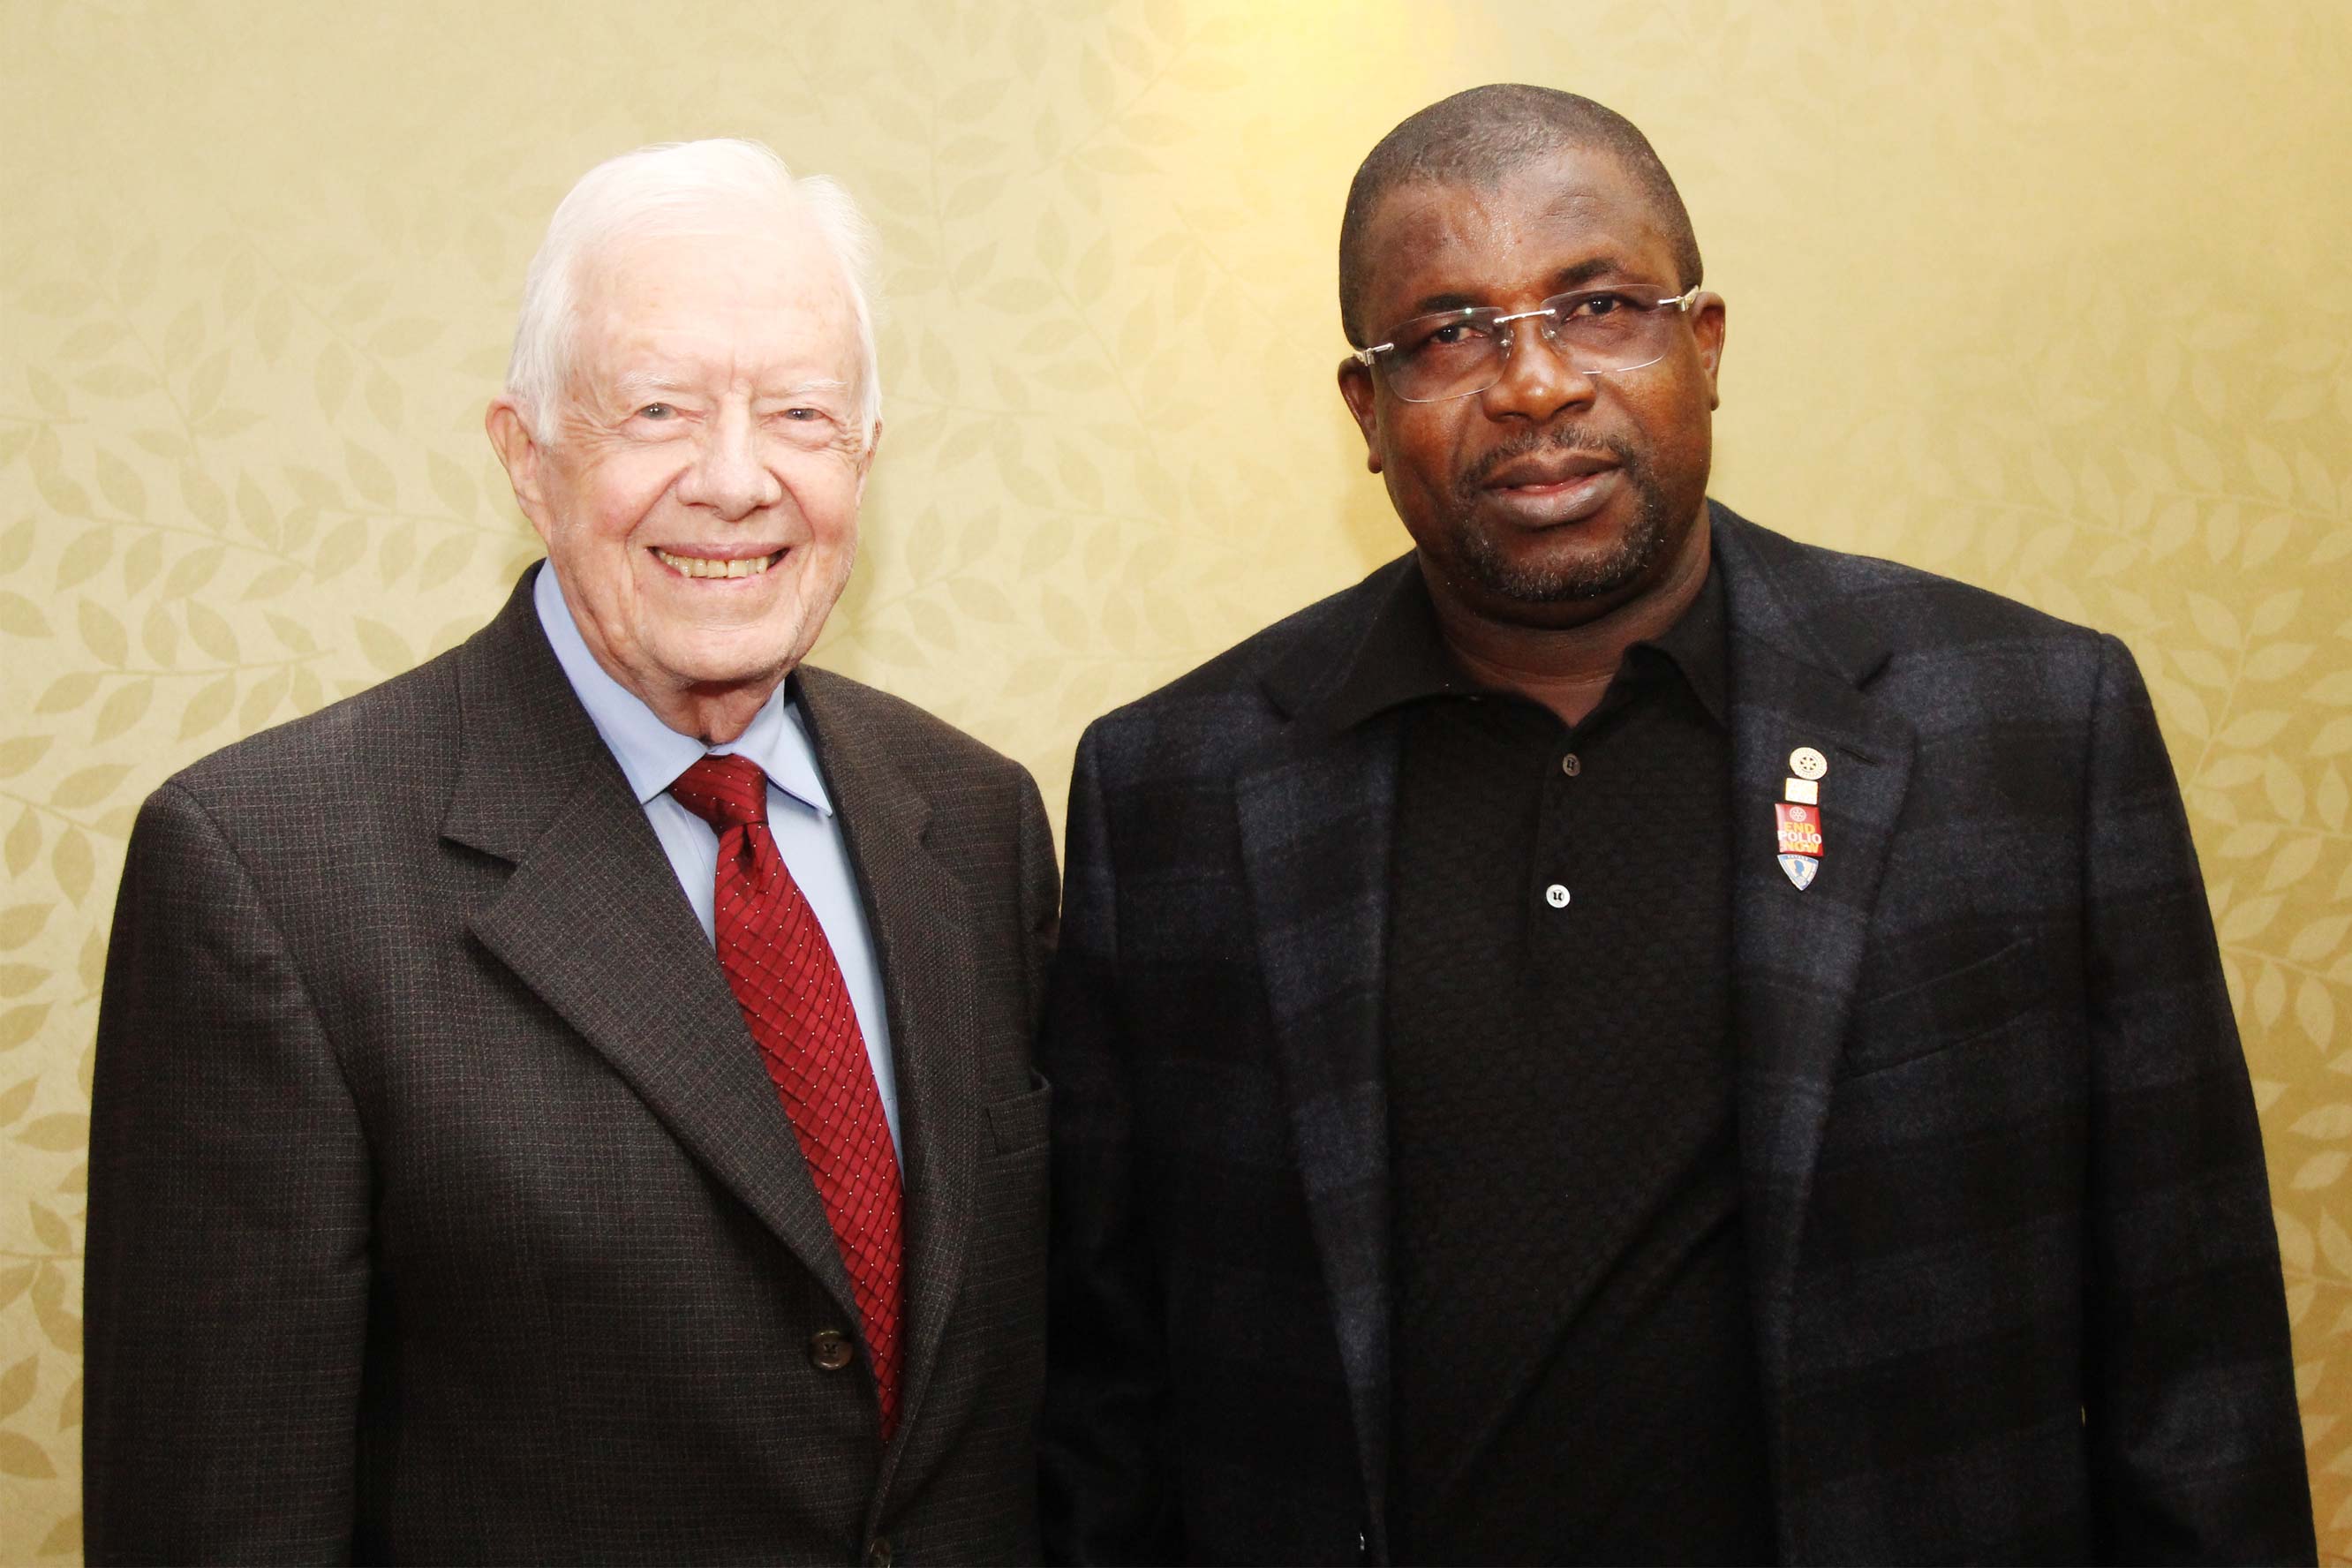 Sir Emeka Offor Meets with Former U.S. President Jimmy Carter